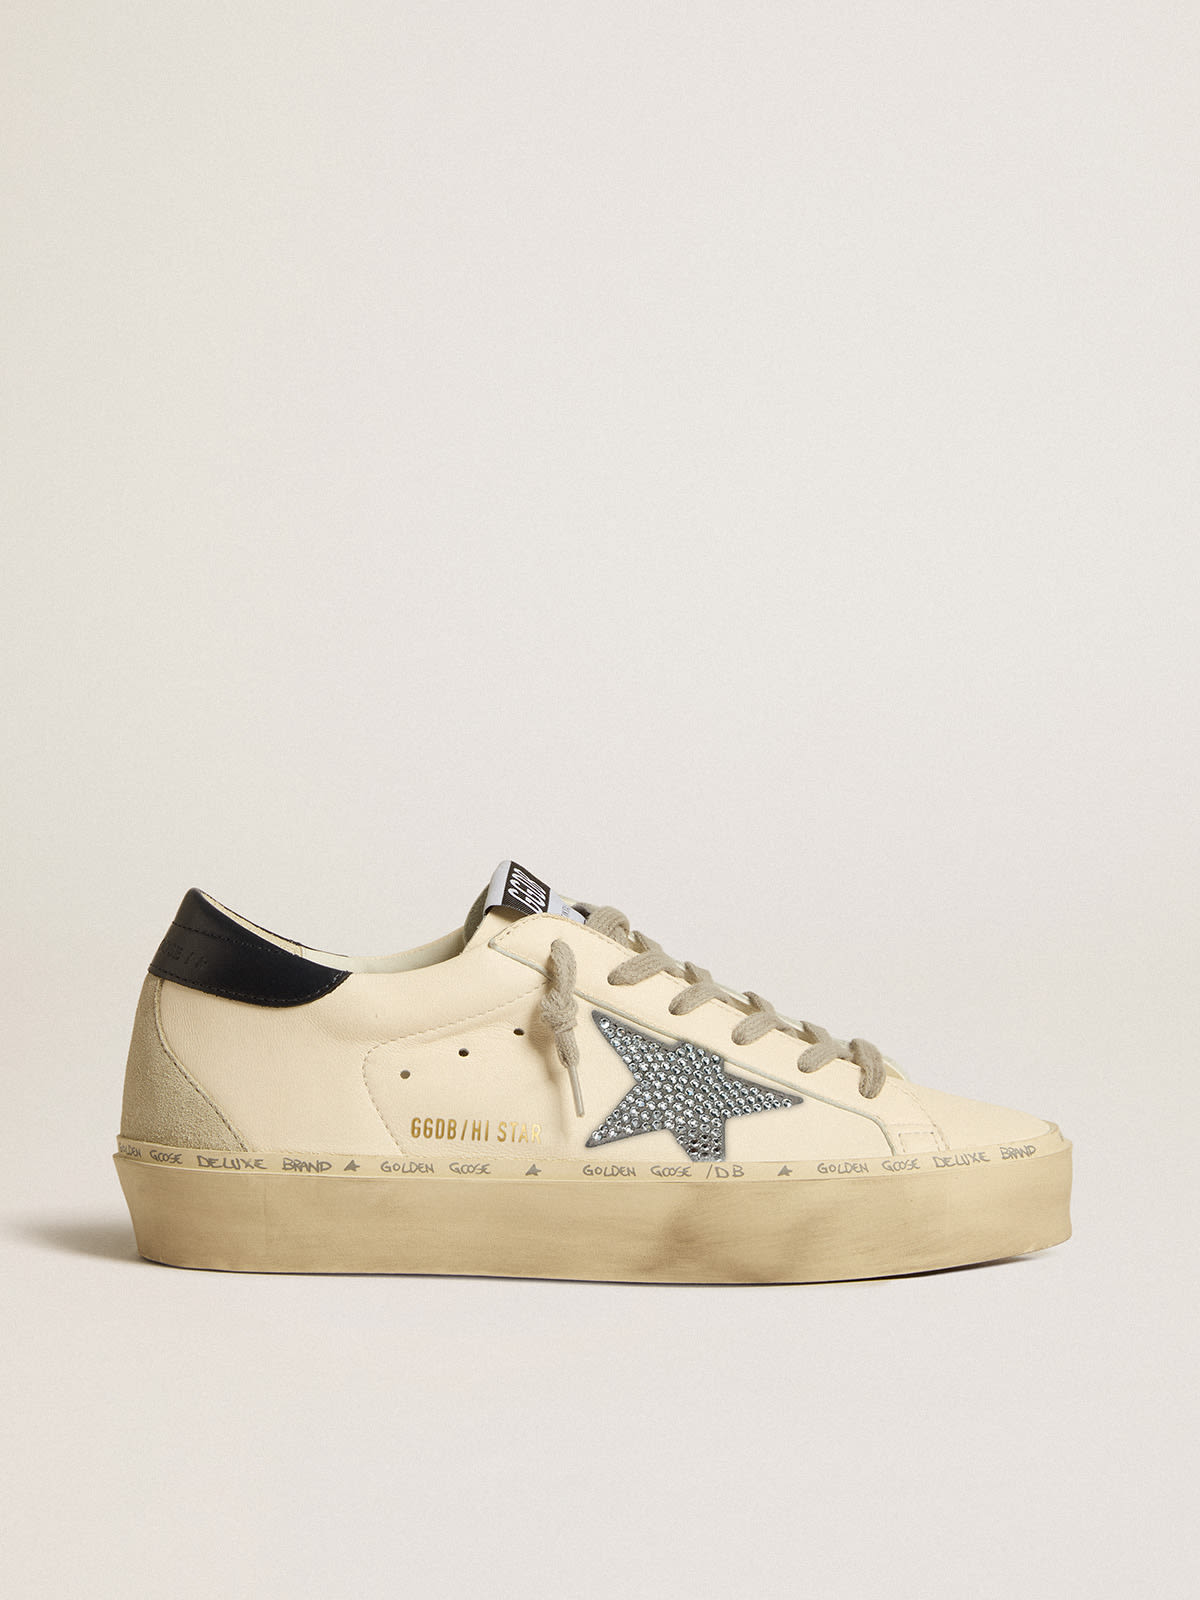 Golden Goose - Hi Star in nappa with crystal star and dark blue heel tab in 